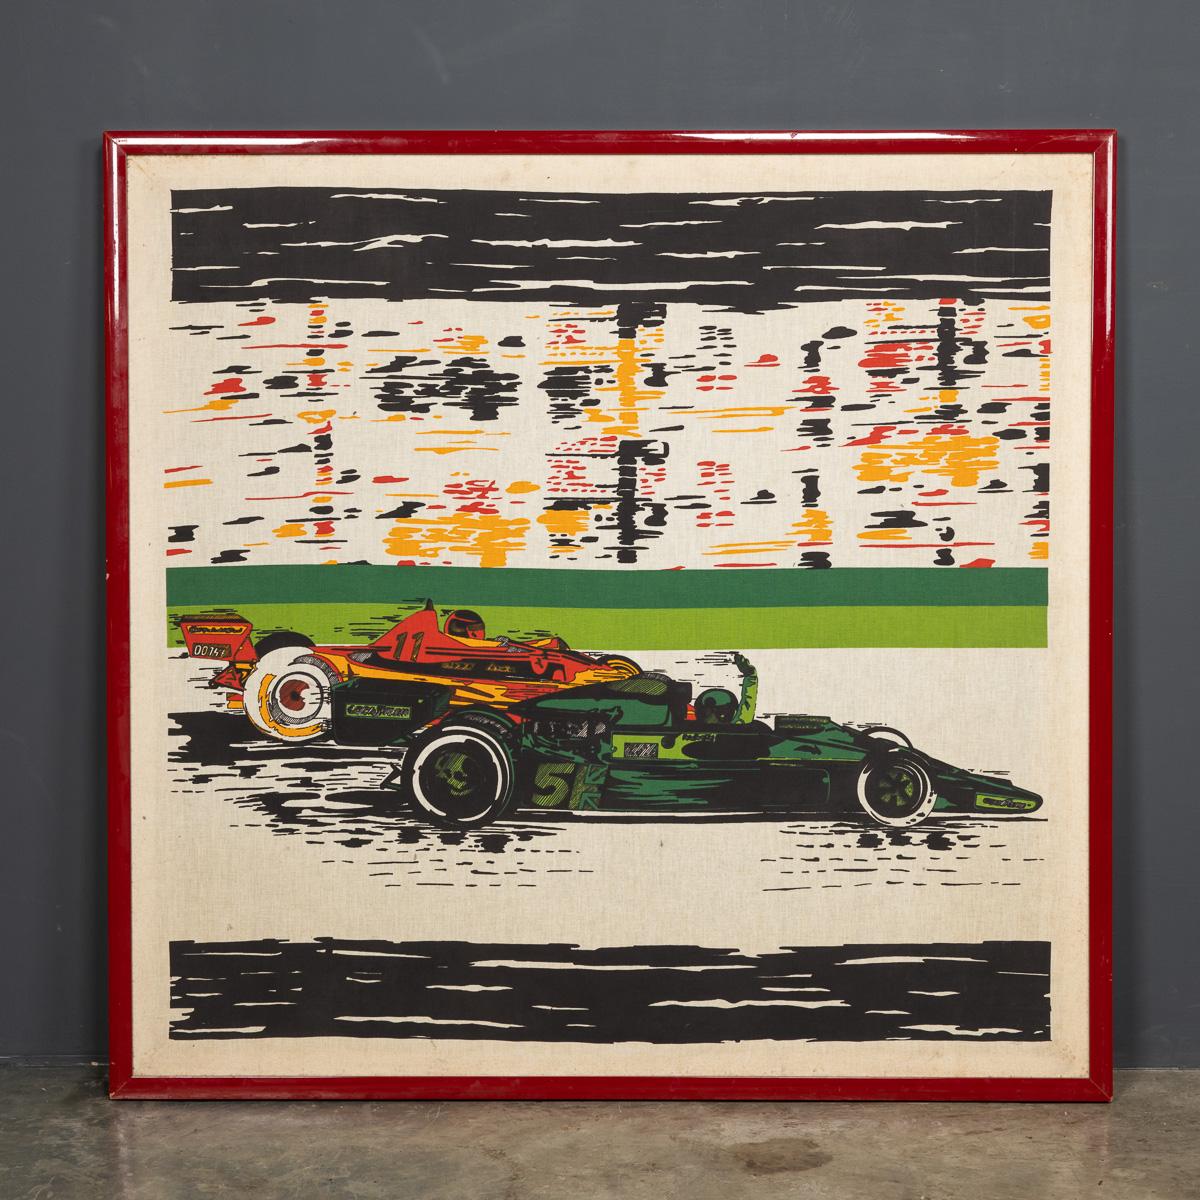 A mid 20th Century silk screen print of racing F1 cars on the track. This superb large posters comes with a timeless made to measure custom frame.

Condition
In Great Condition - No Damage.

Size
Width: 111cm
Height: 107cm.